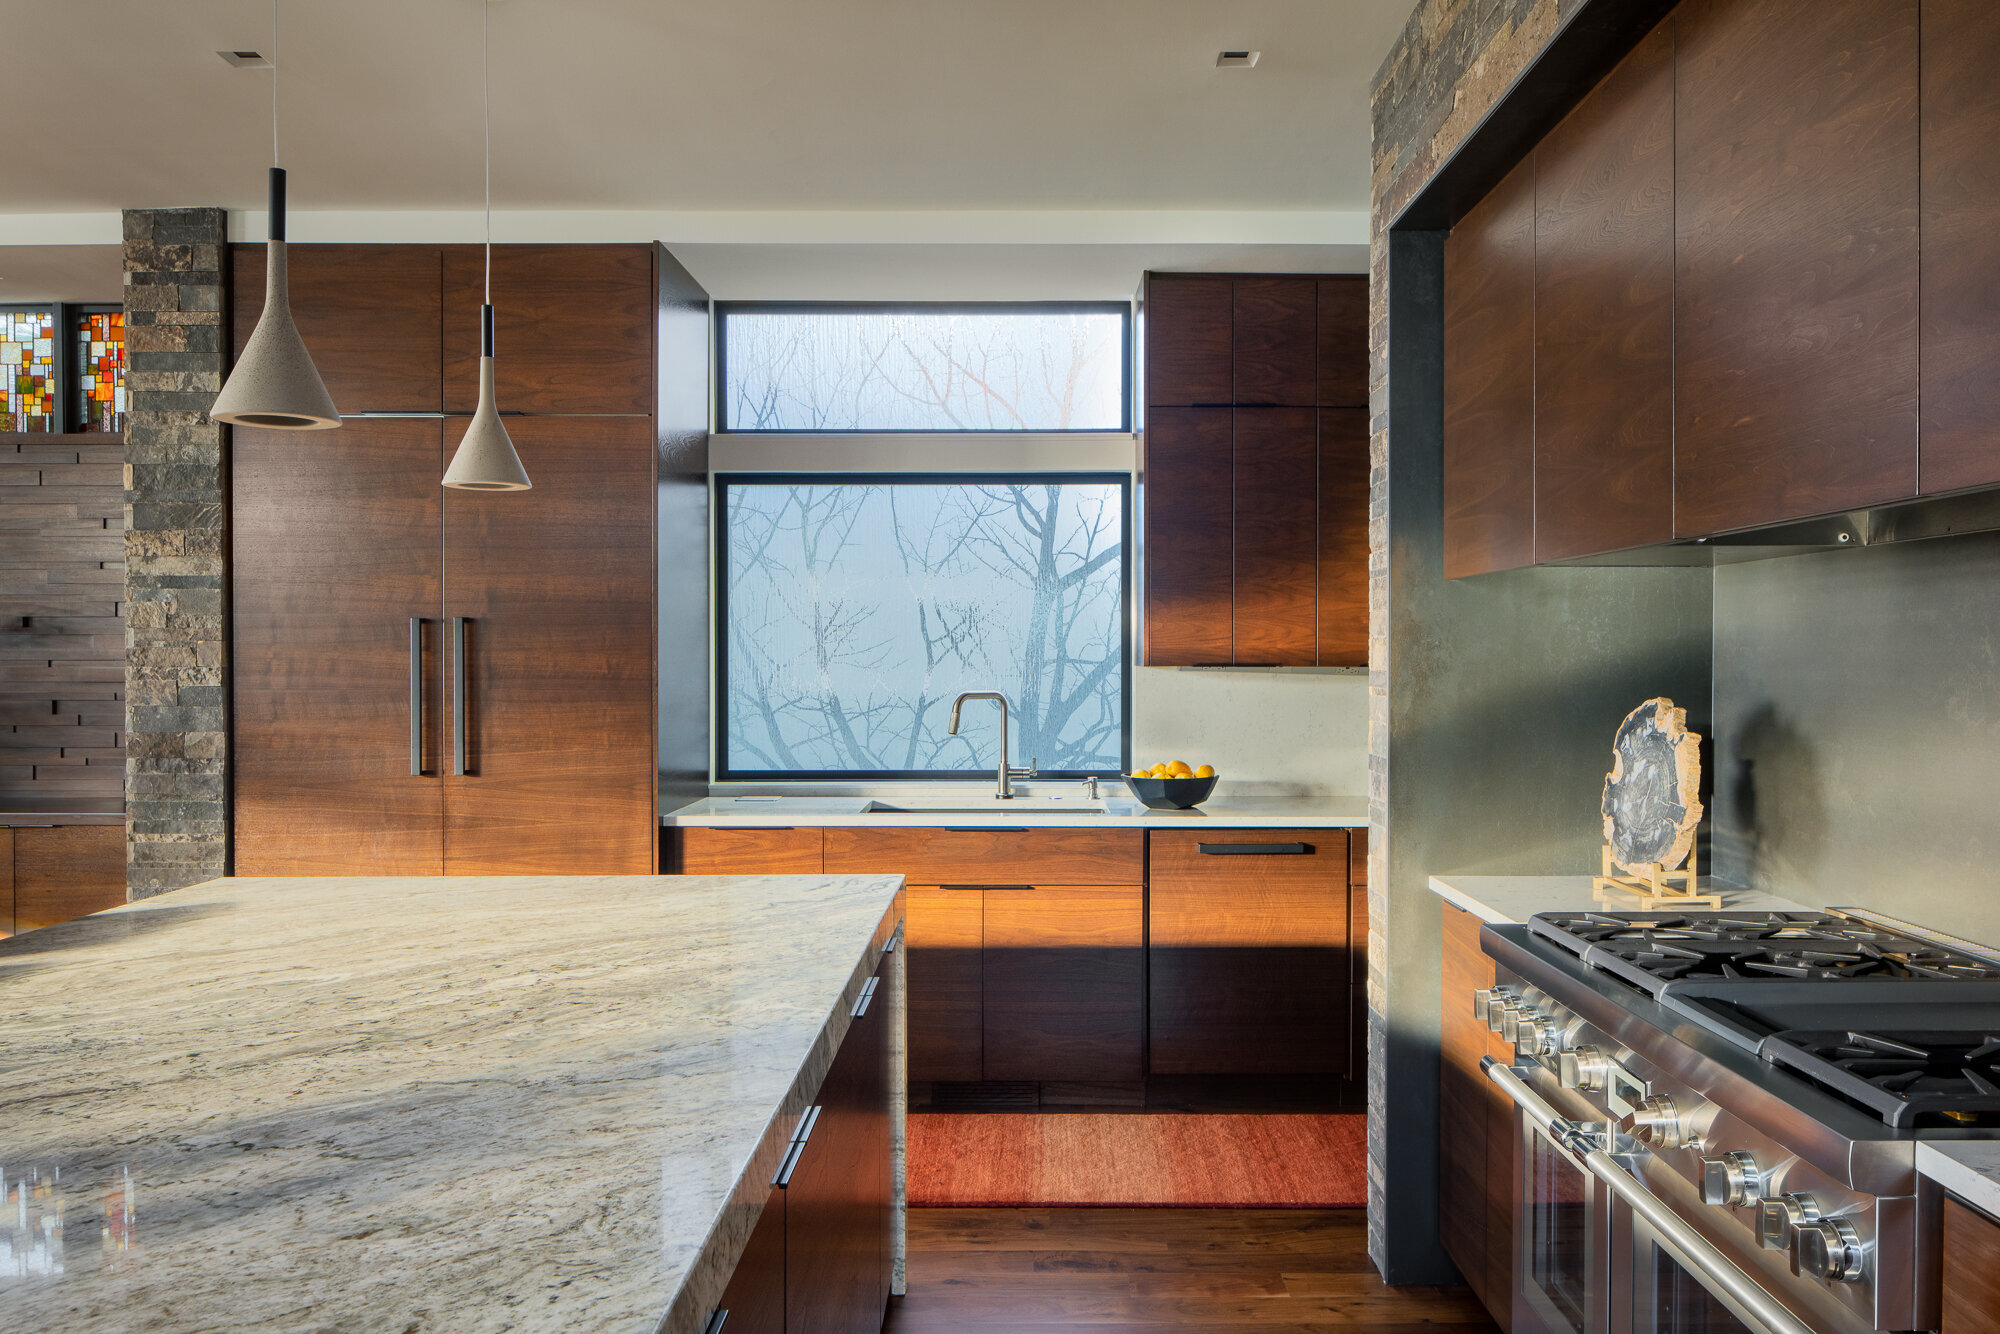 Beautiful light splashes across this modern kitchen in this architectural photo